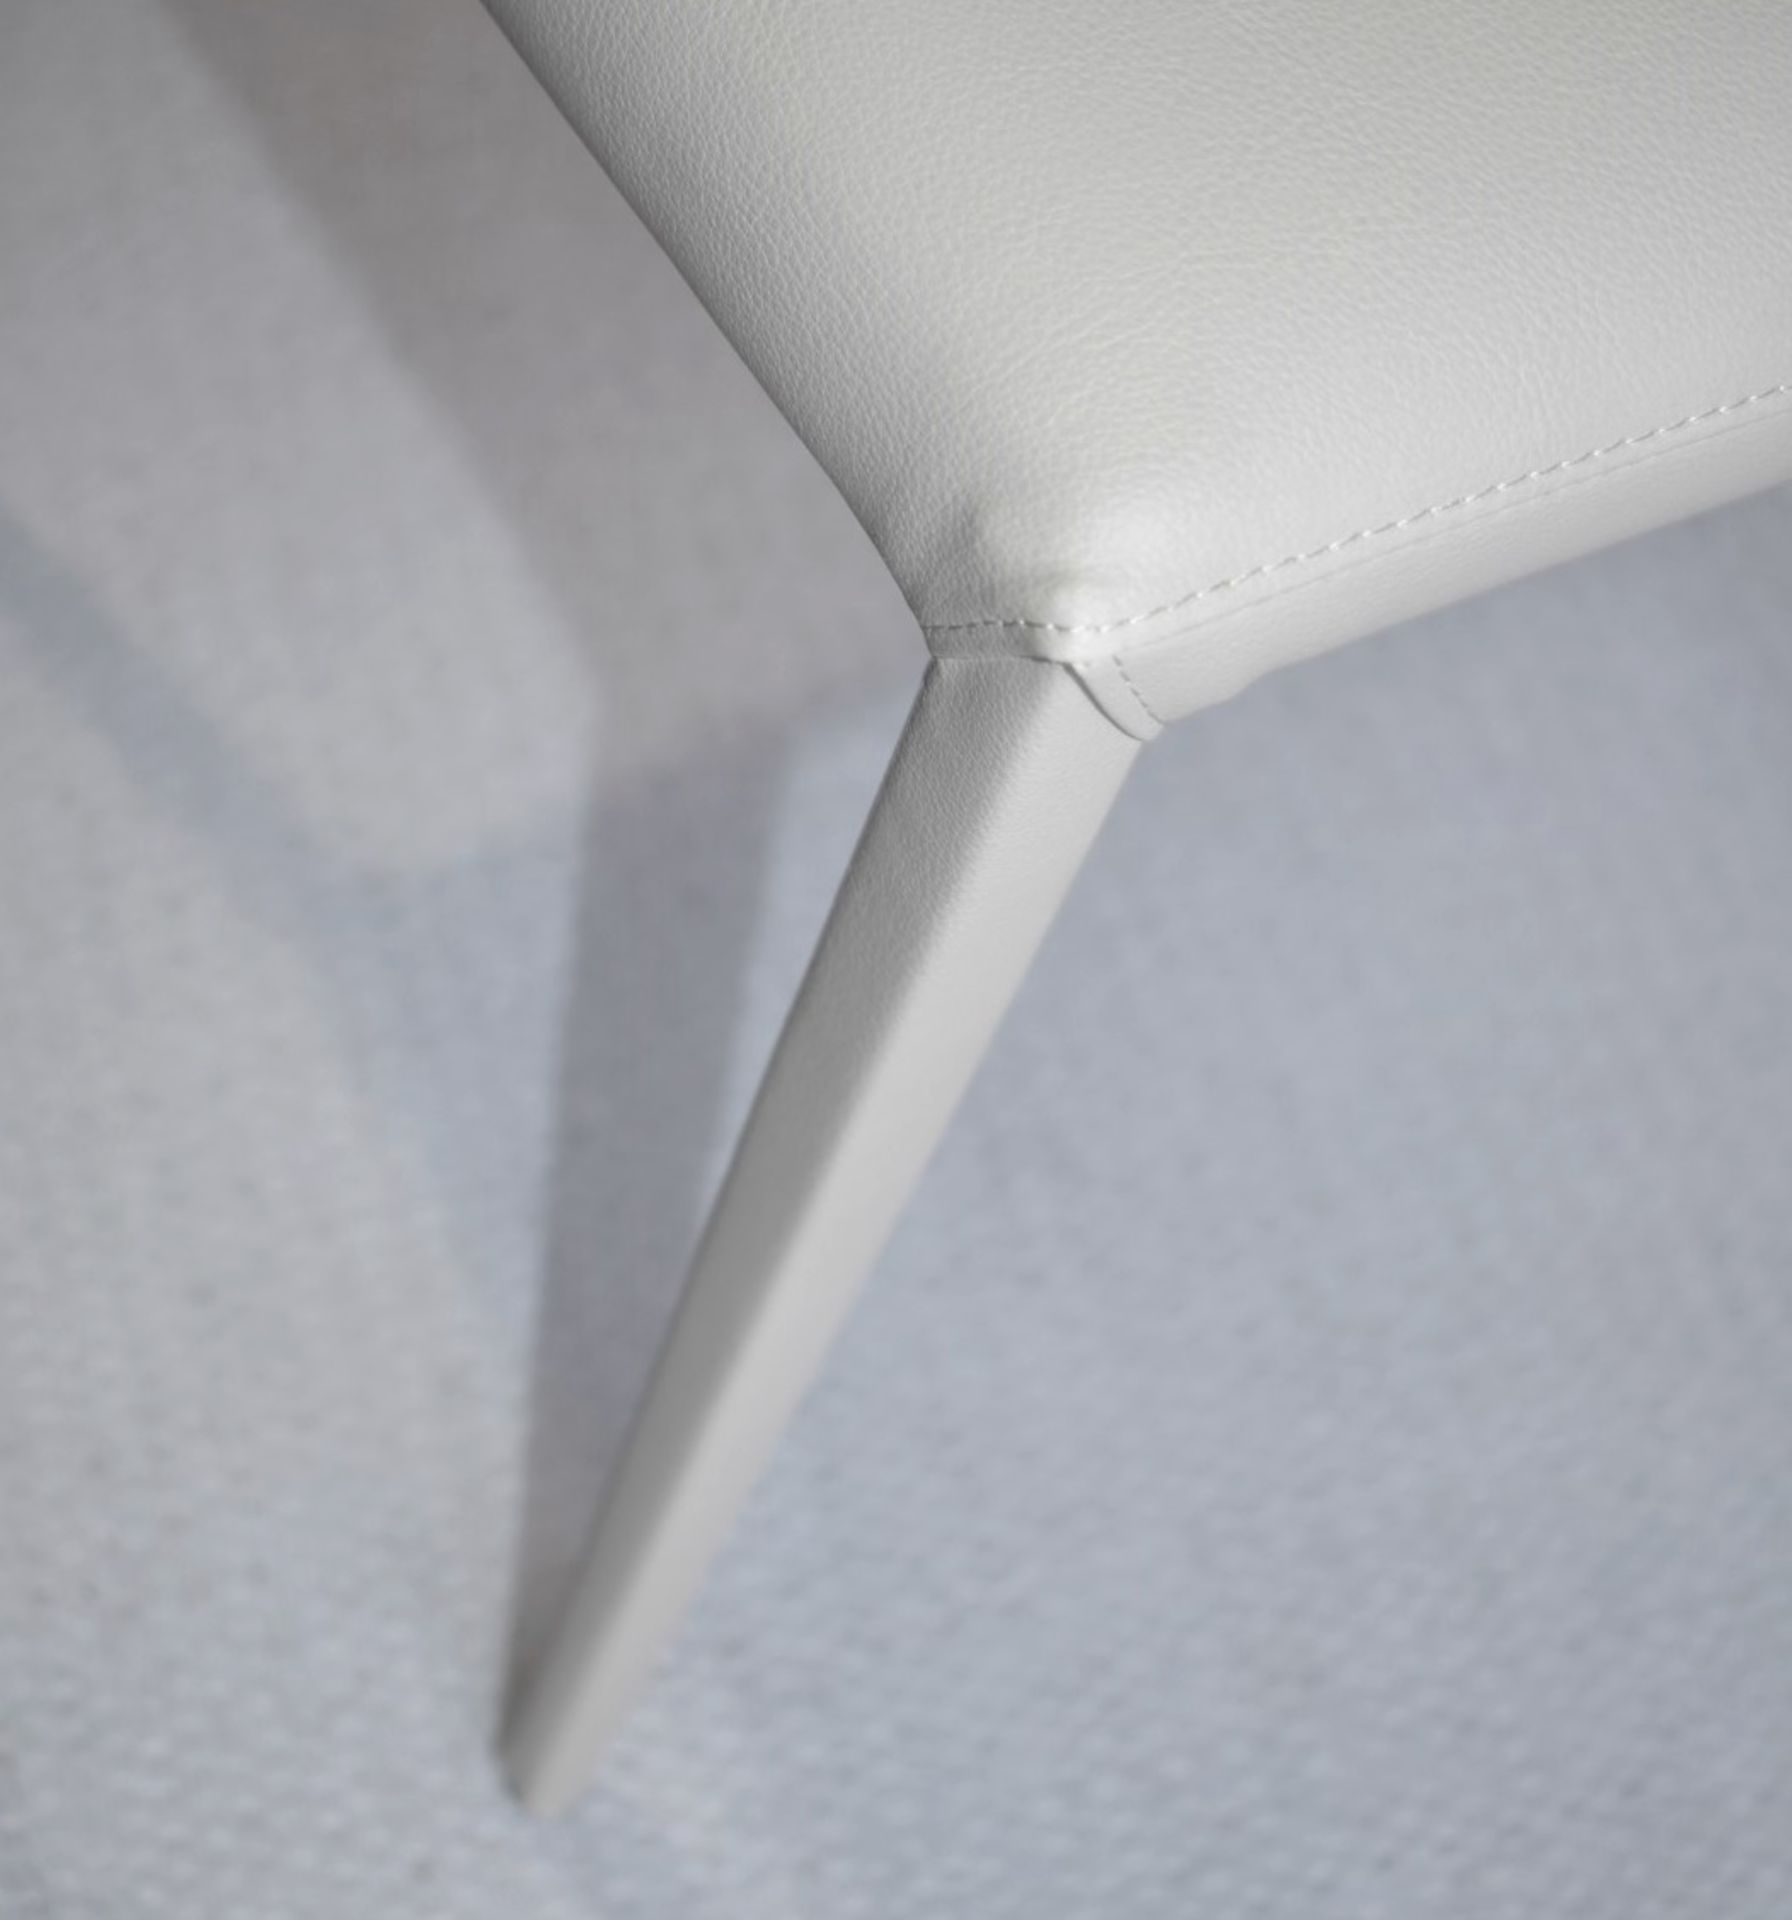 1 x CATTELAN ITALIA 'Norma' Designer Fully Upholstered Chair in a Pale Premium Leather - Image 3 of 9